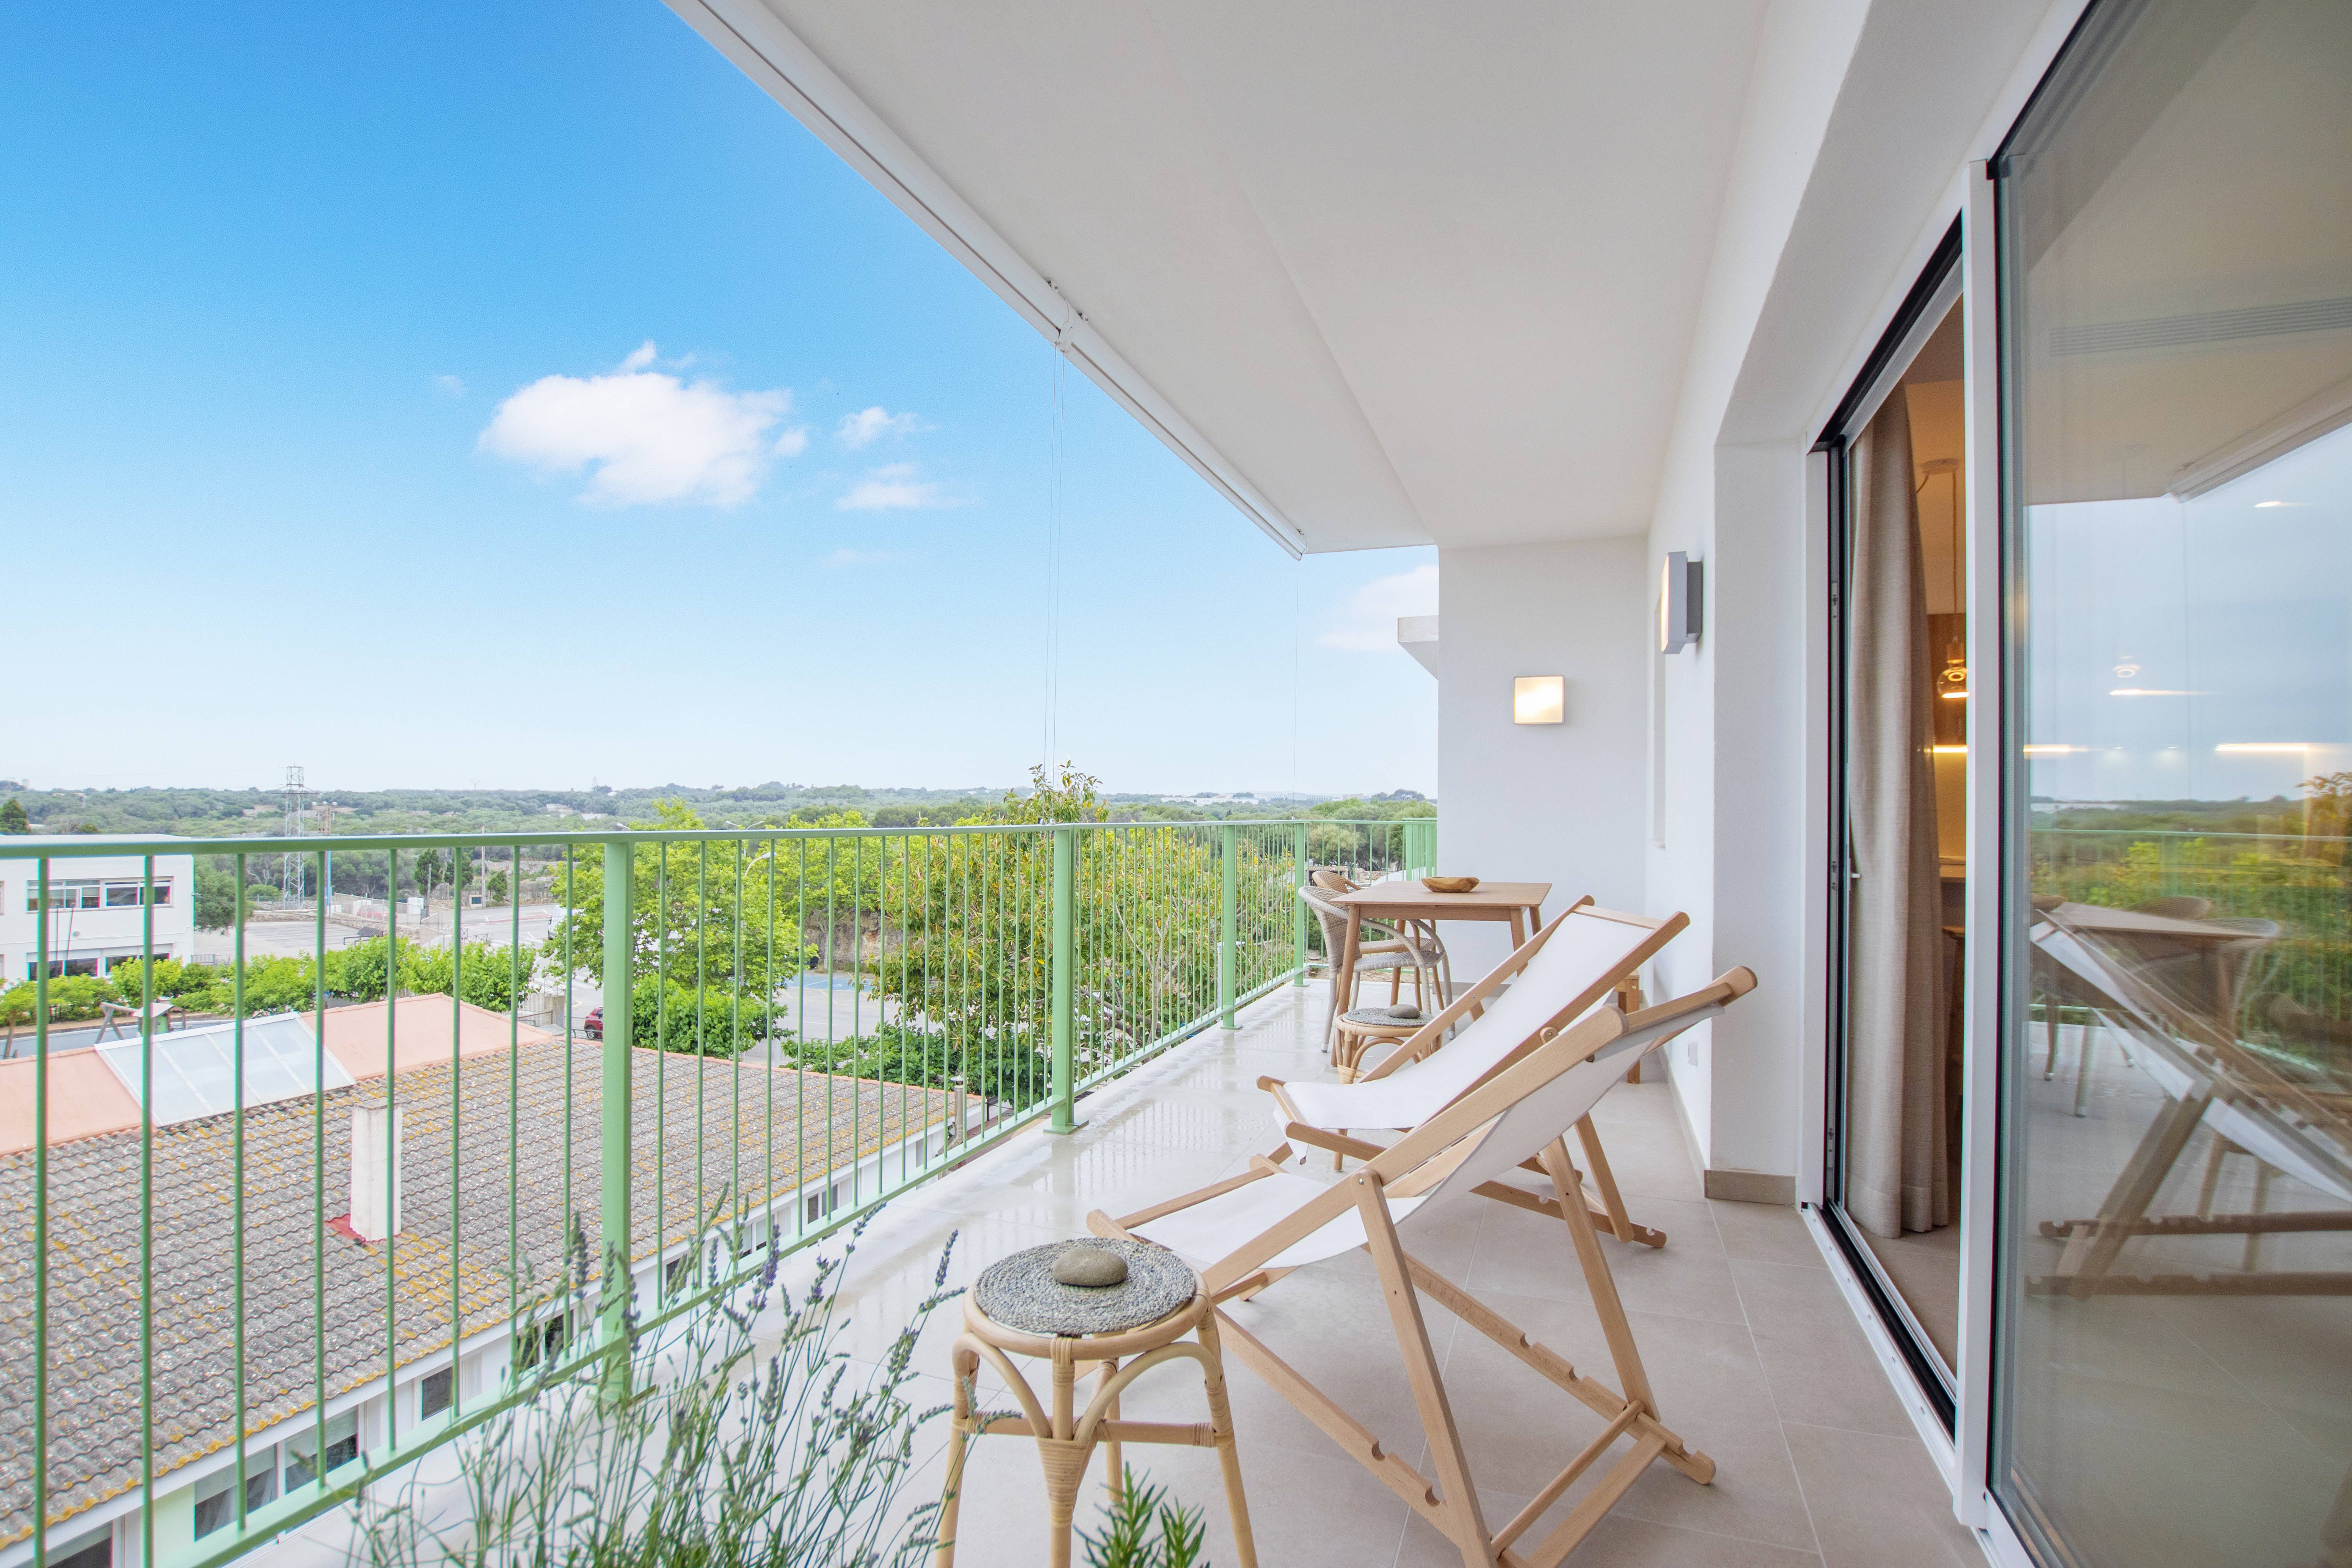 New development - Exciting new development in residential area in Mahon, Menorca